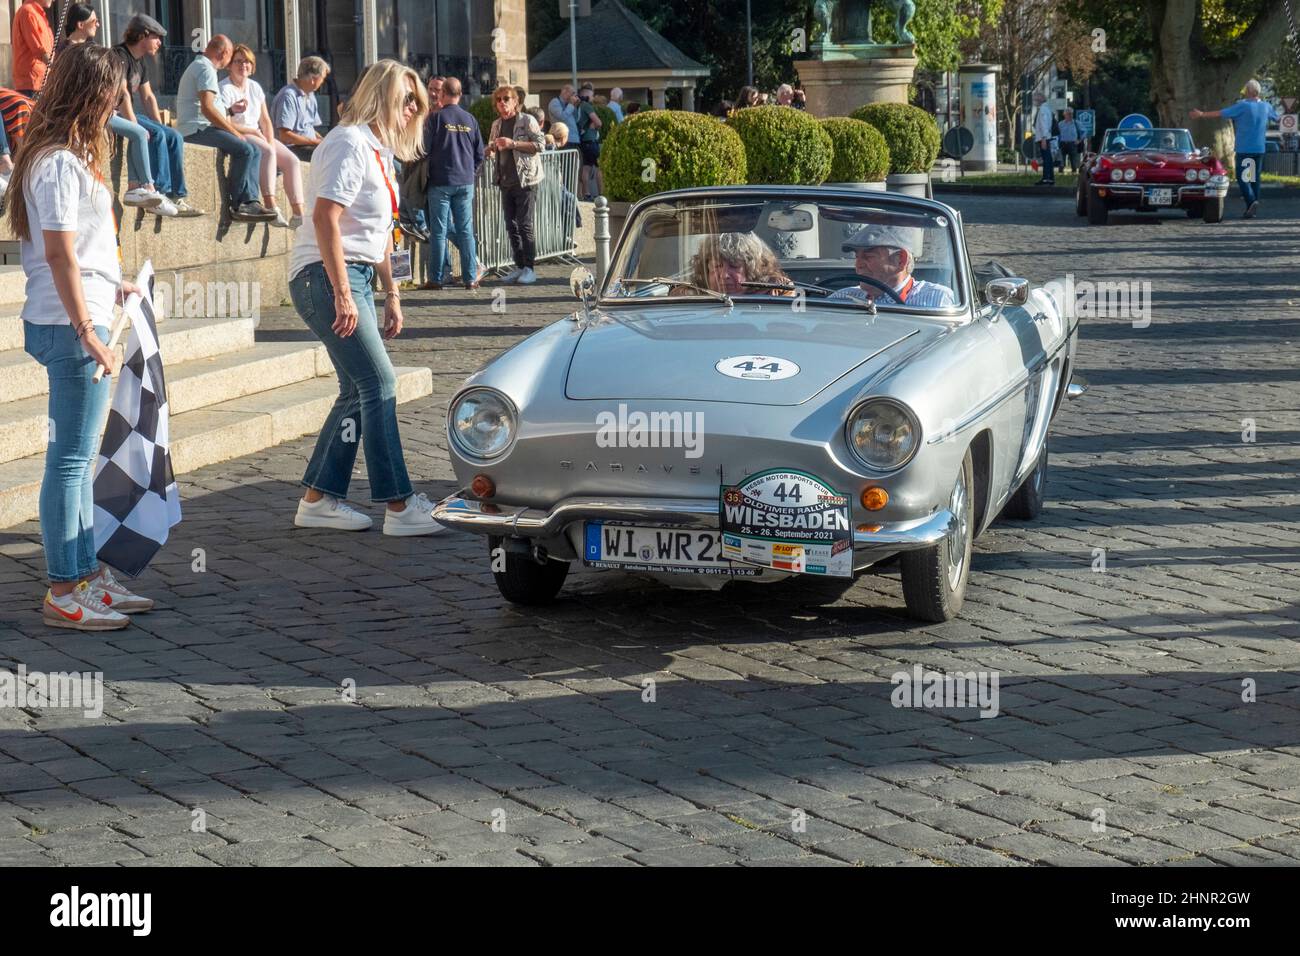 the Renault Caravelle reaches the final goal  of the Oldtimer ralley Wiesbaden in Wiesbaden after a challenge in the Rheingau, Germany Stock Photo